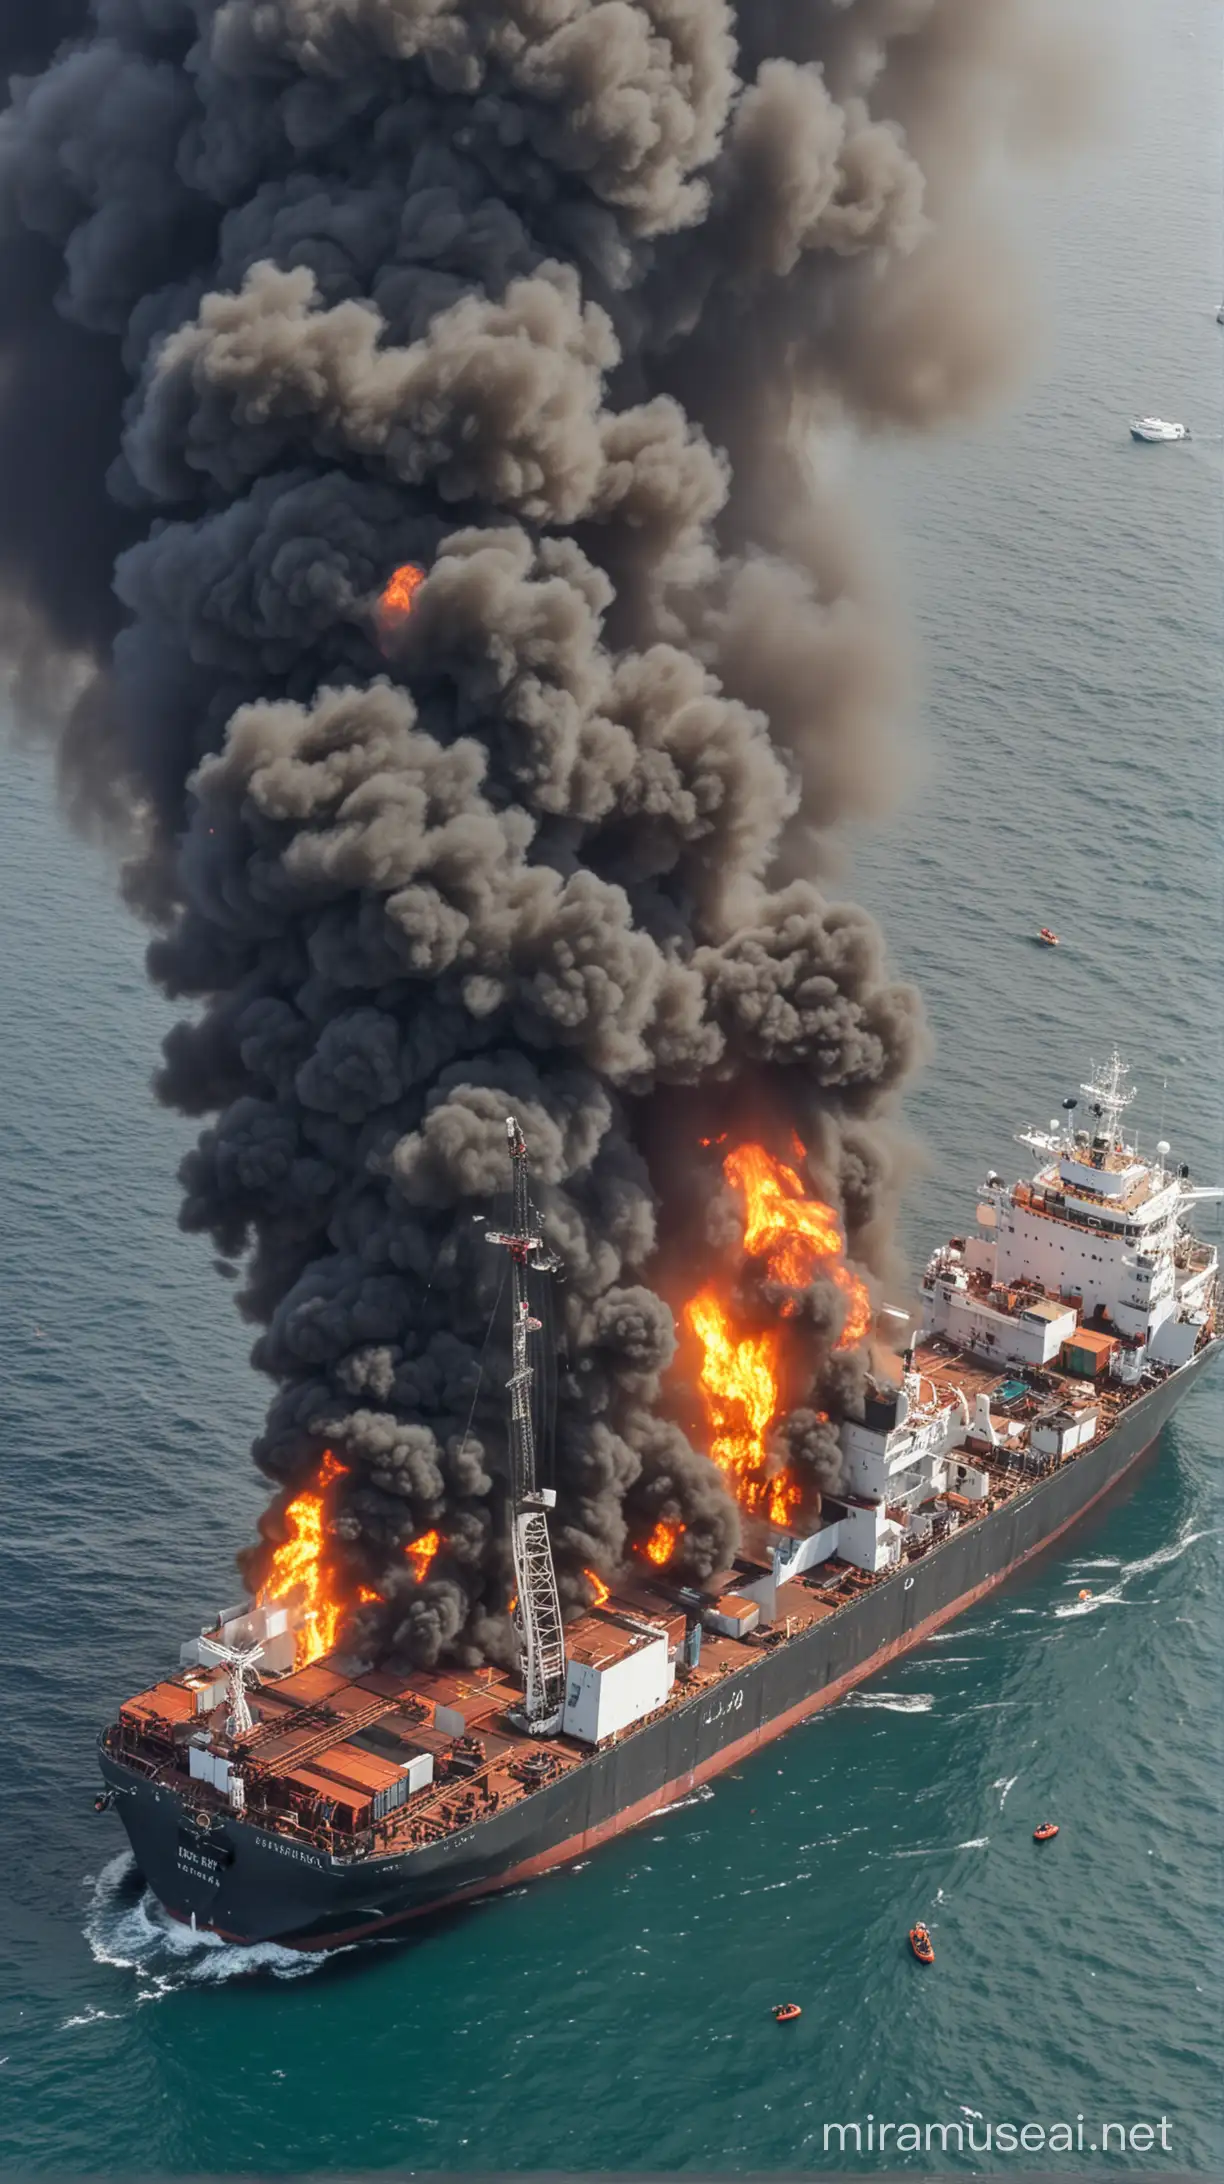 Helicopters Pouring Water on Burning Cargo Ship